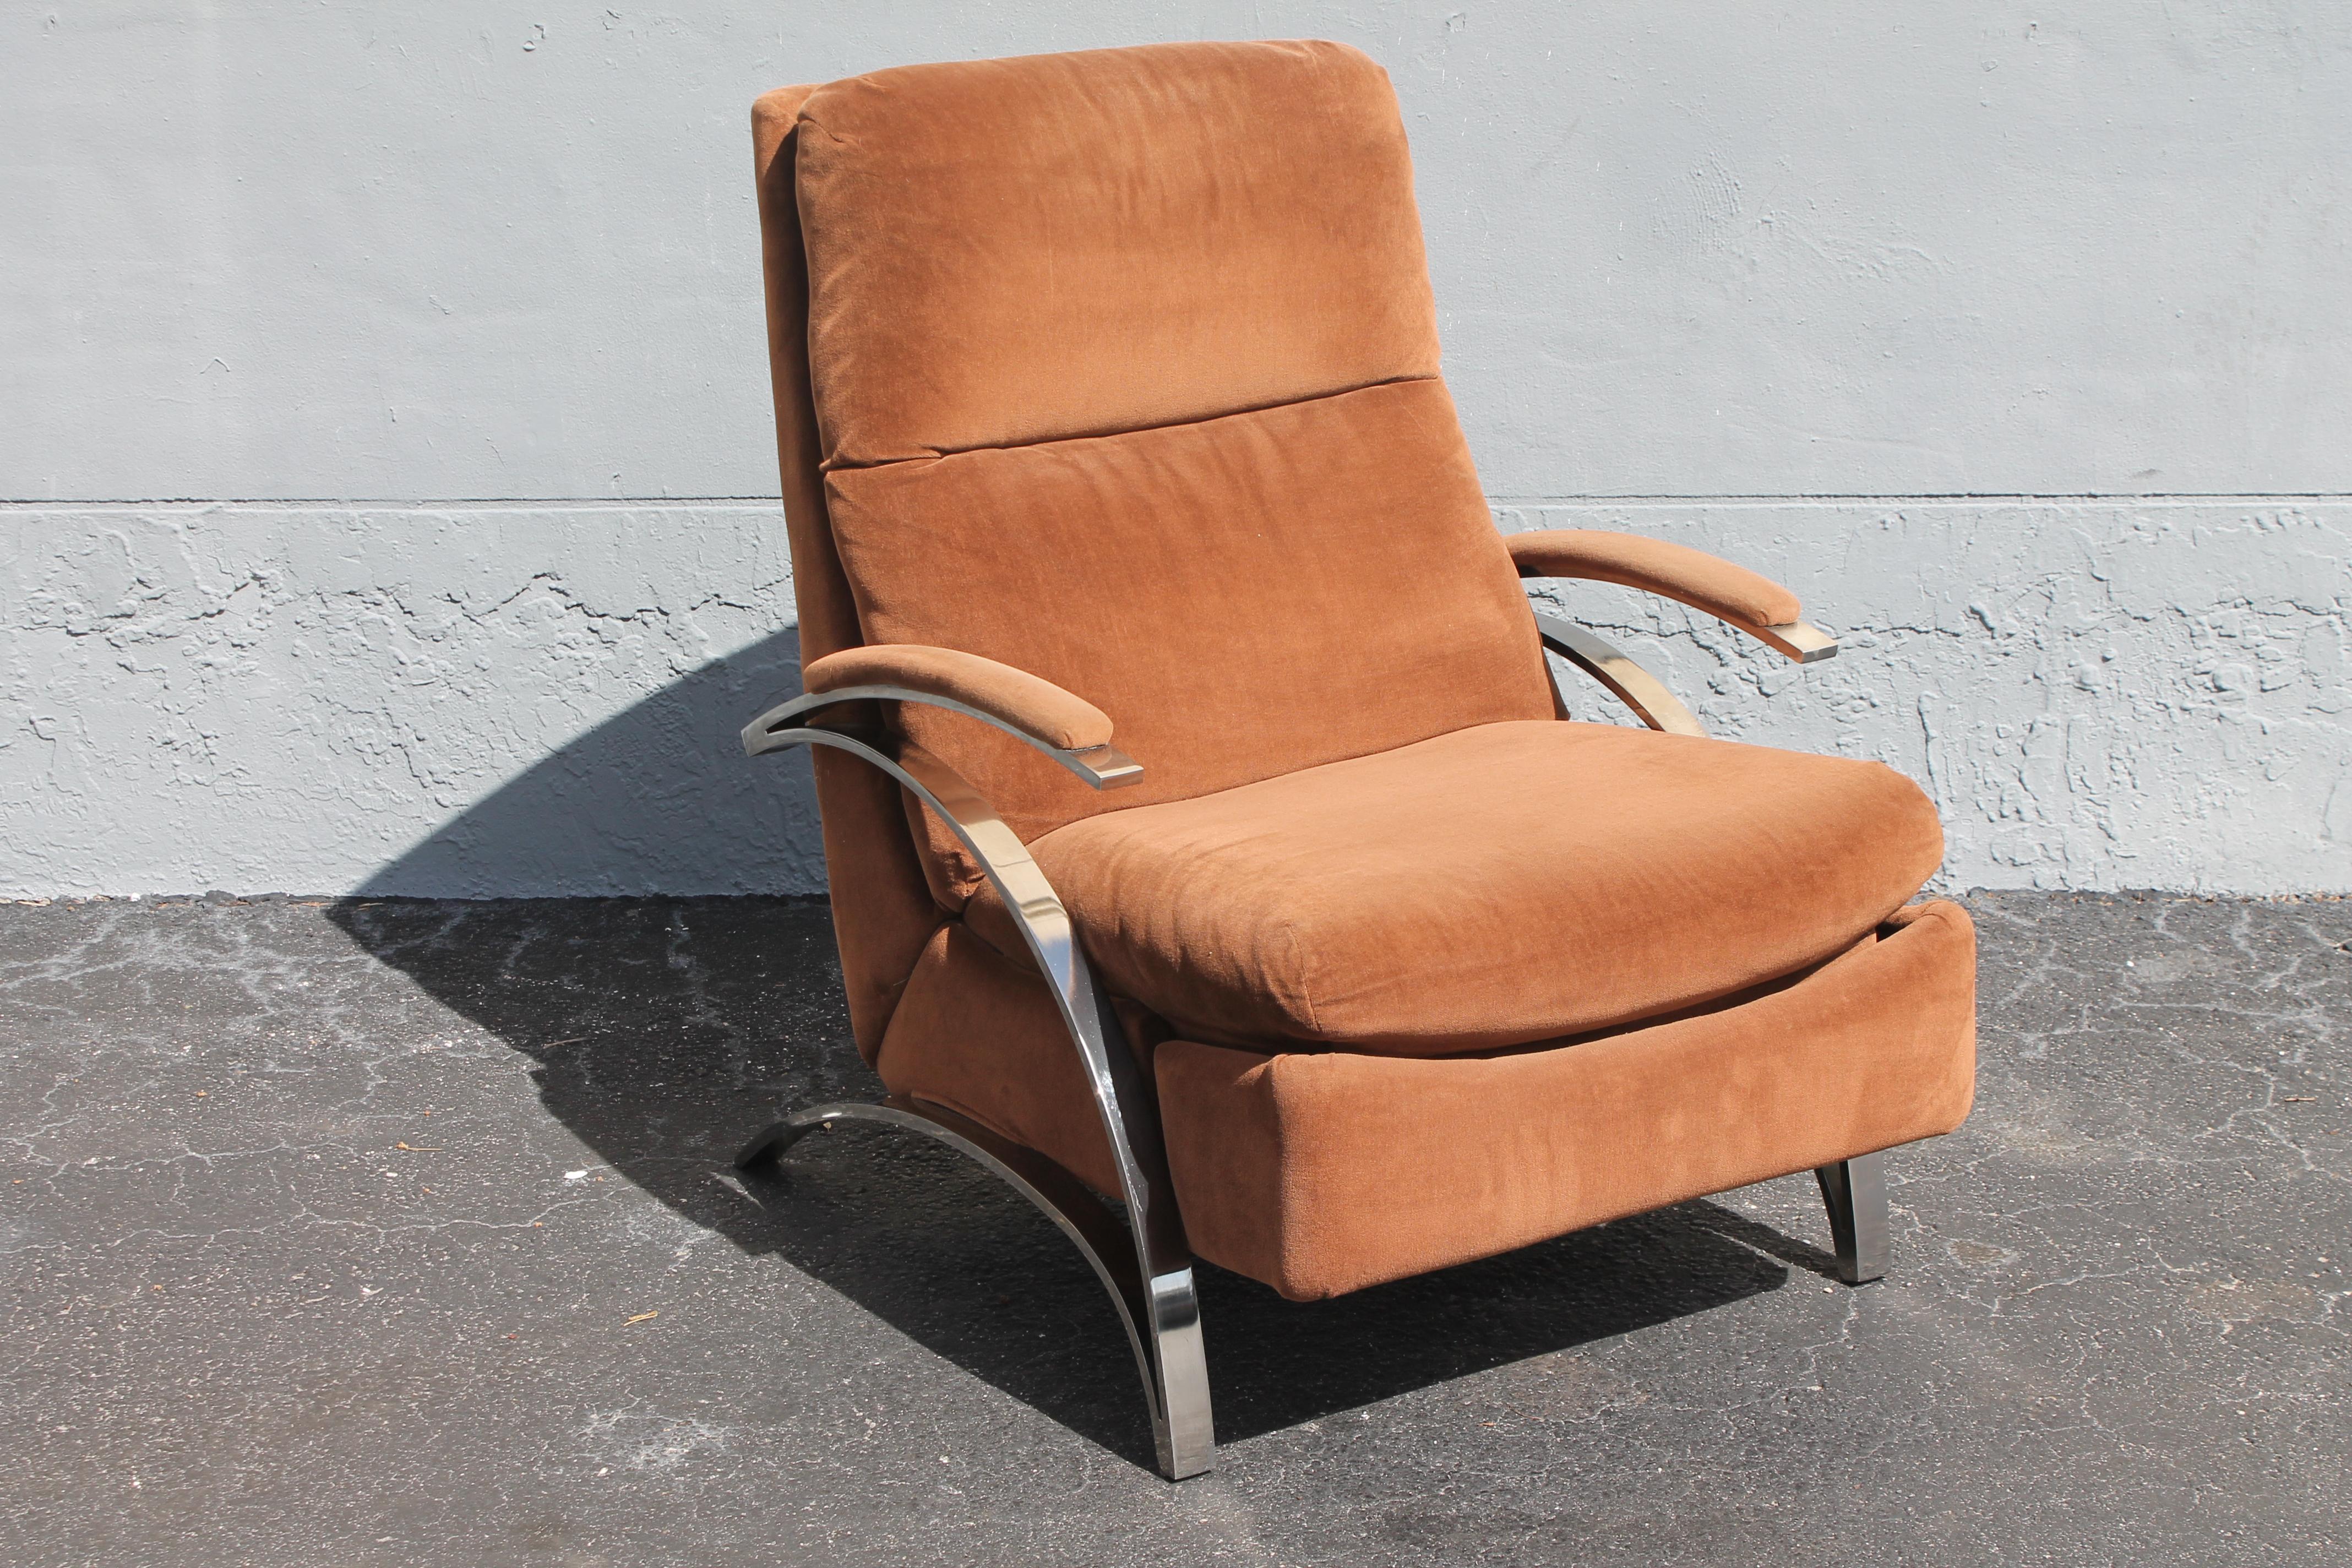 1070's Vintage Plush Brown with Chrome Recliner/ Barcalounger Chair In Good Condition For Sale In Opa Locka, FL